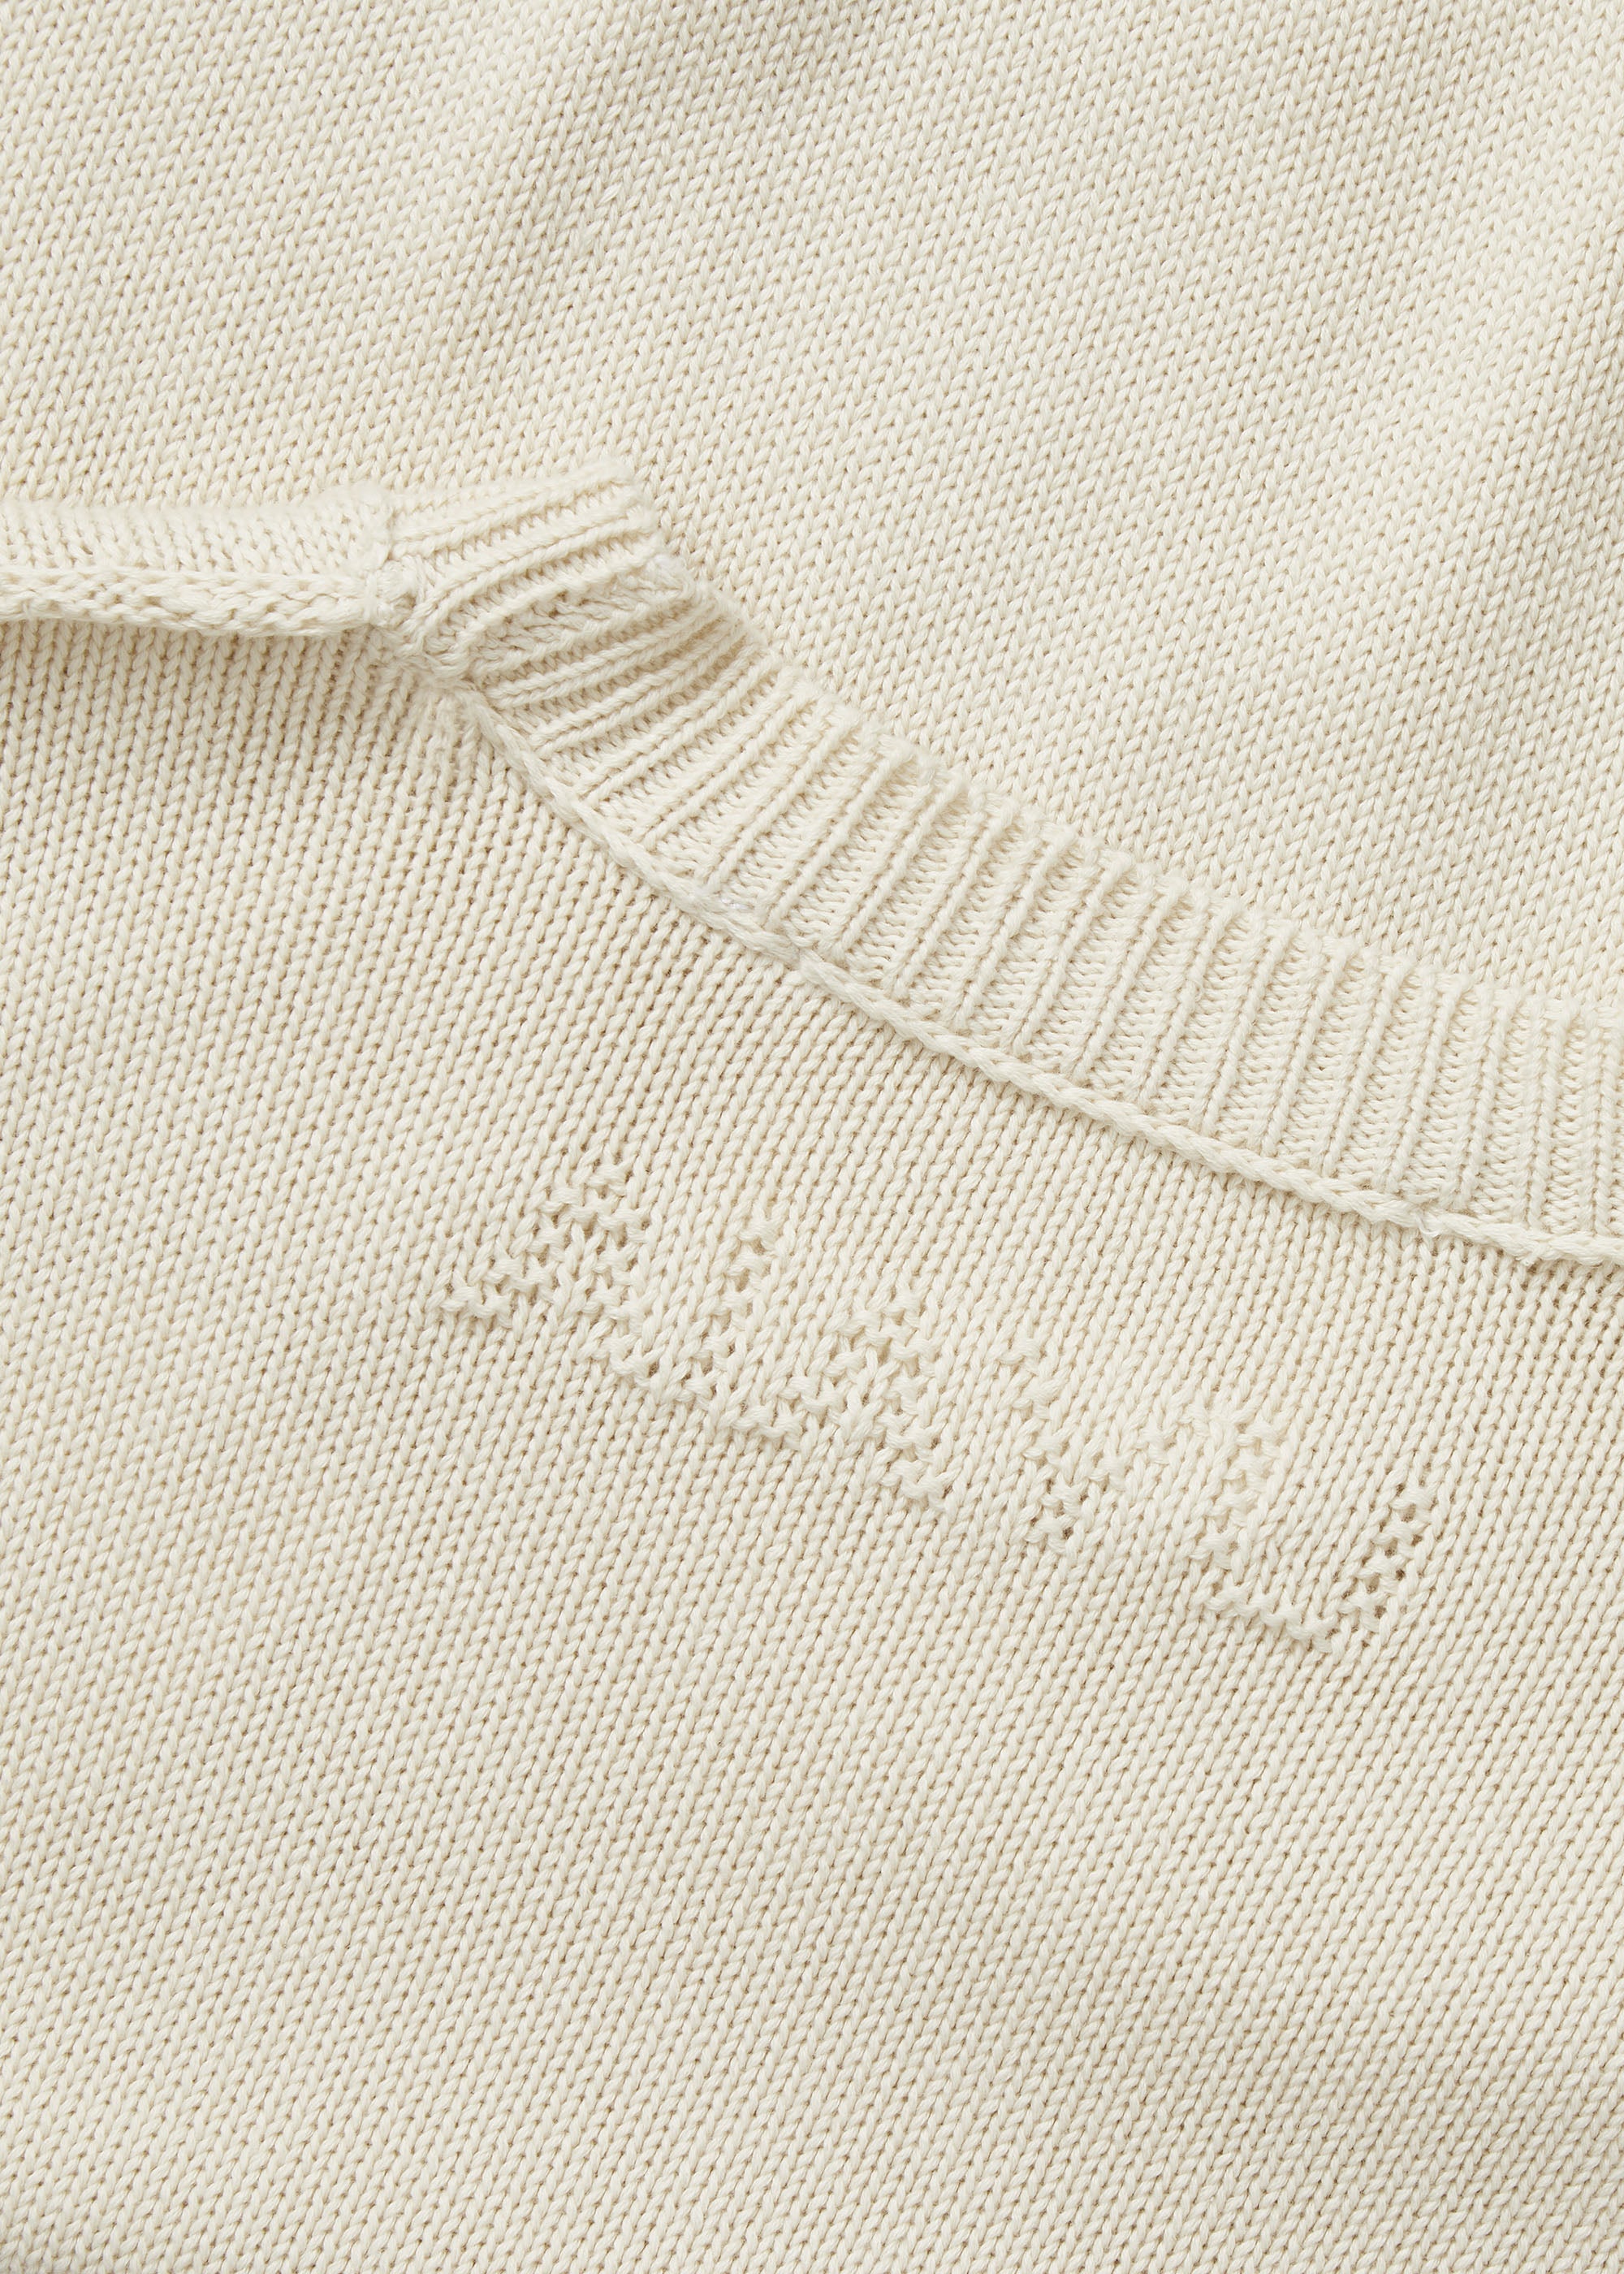 Monochrome knit-incorporated logo sits at the back of the neck.